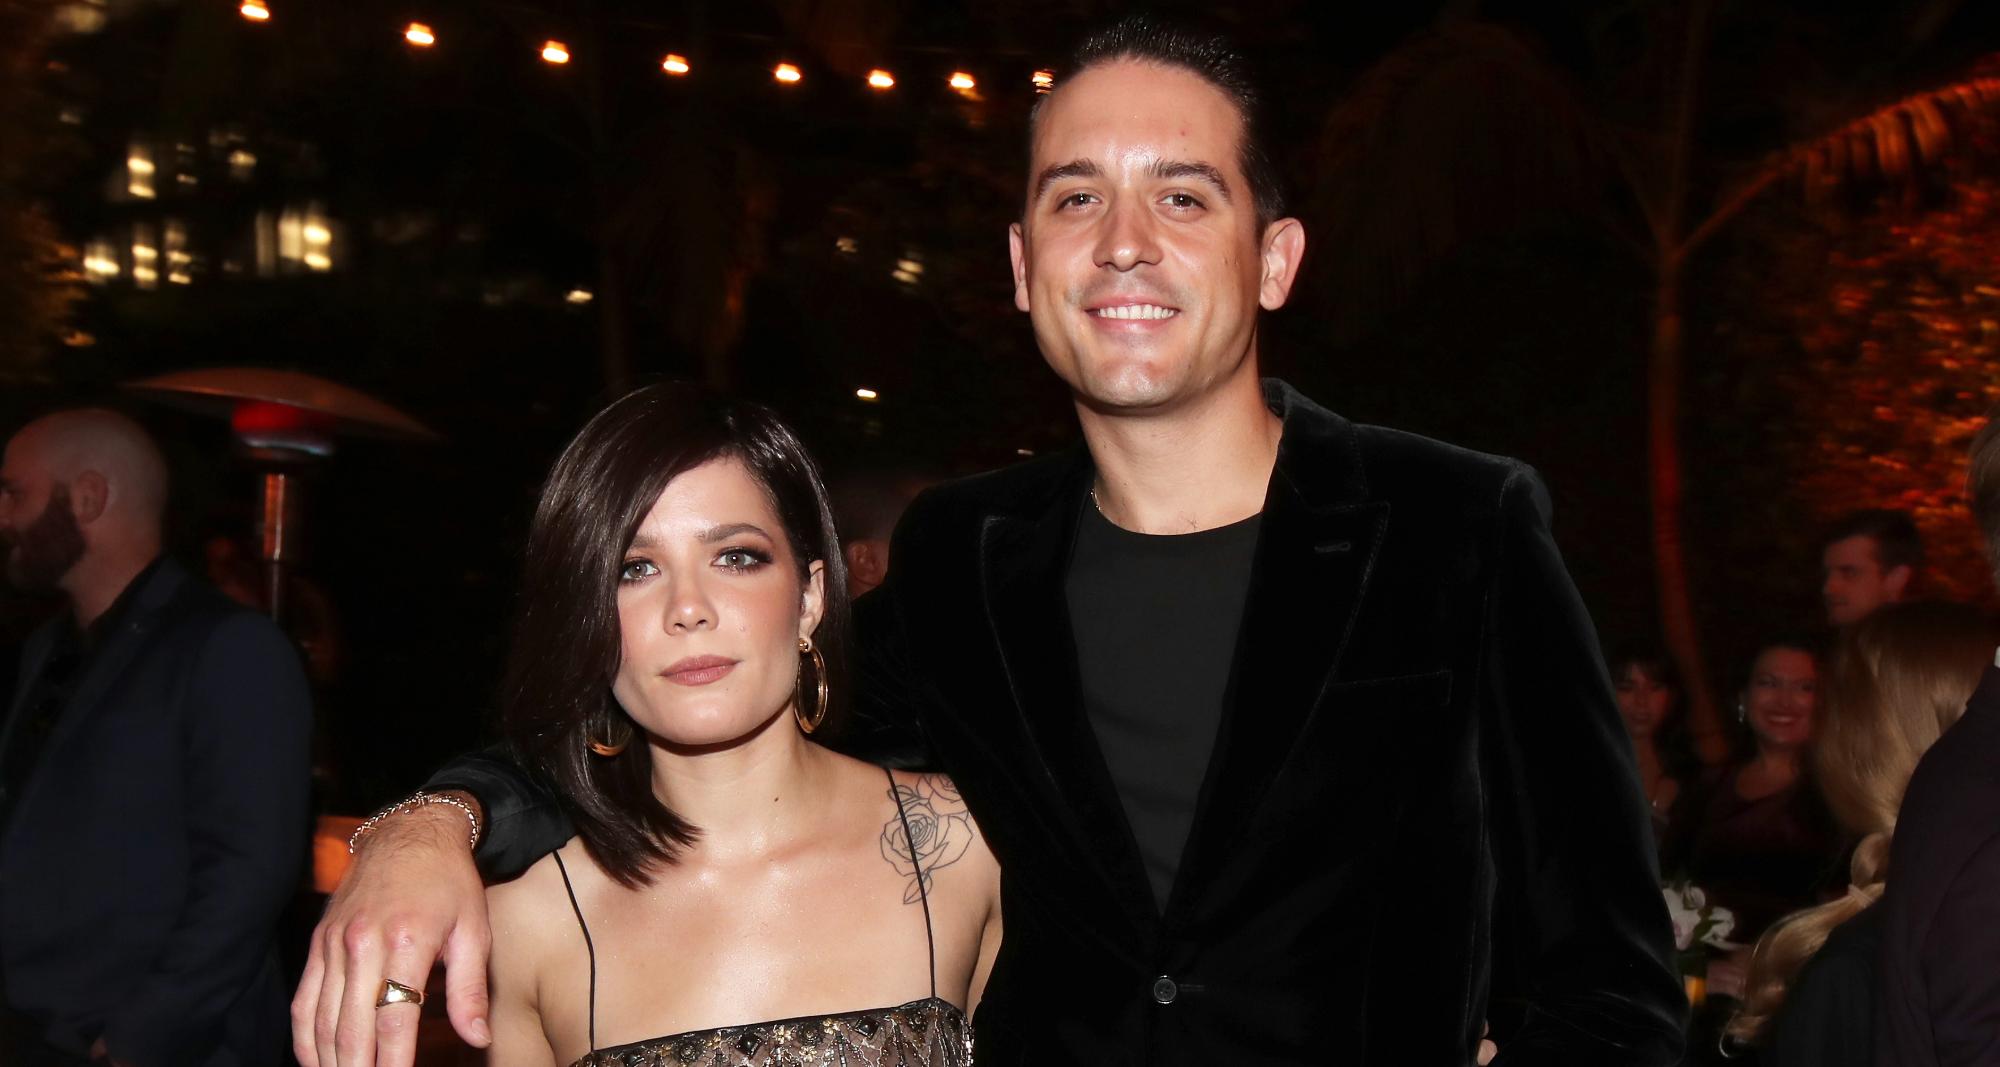 Are halsey and g-eazy back together 2021?